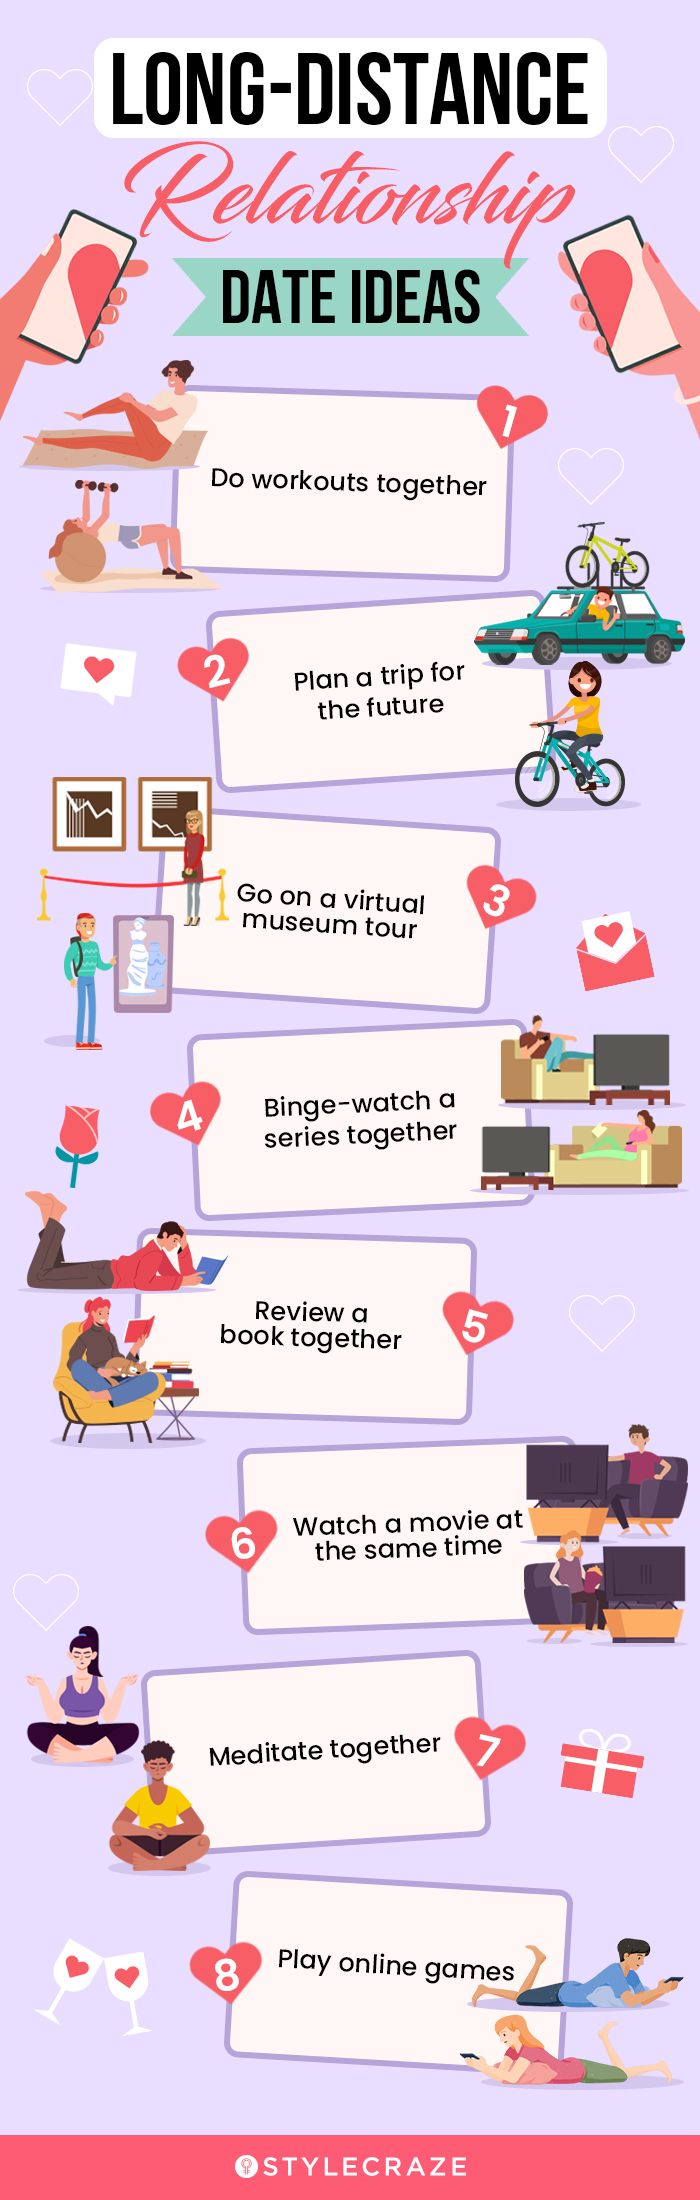 long distance relationship date ideas (infographic)